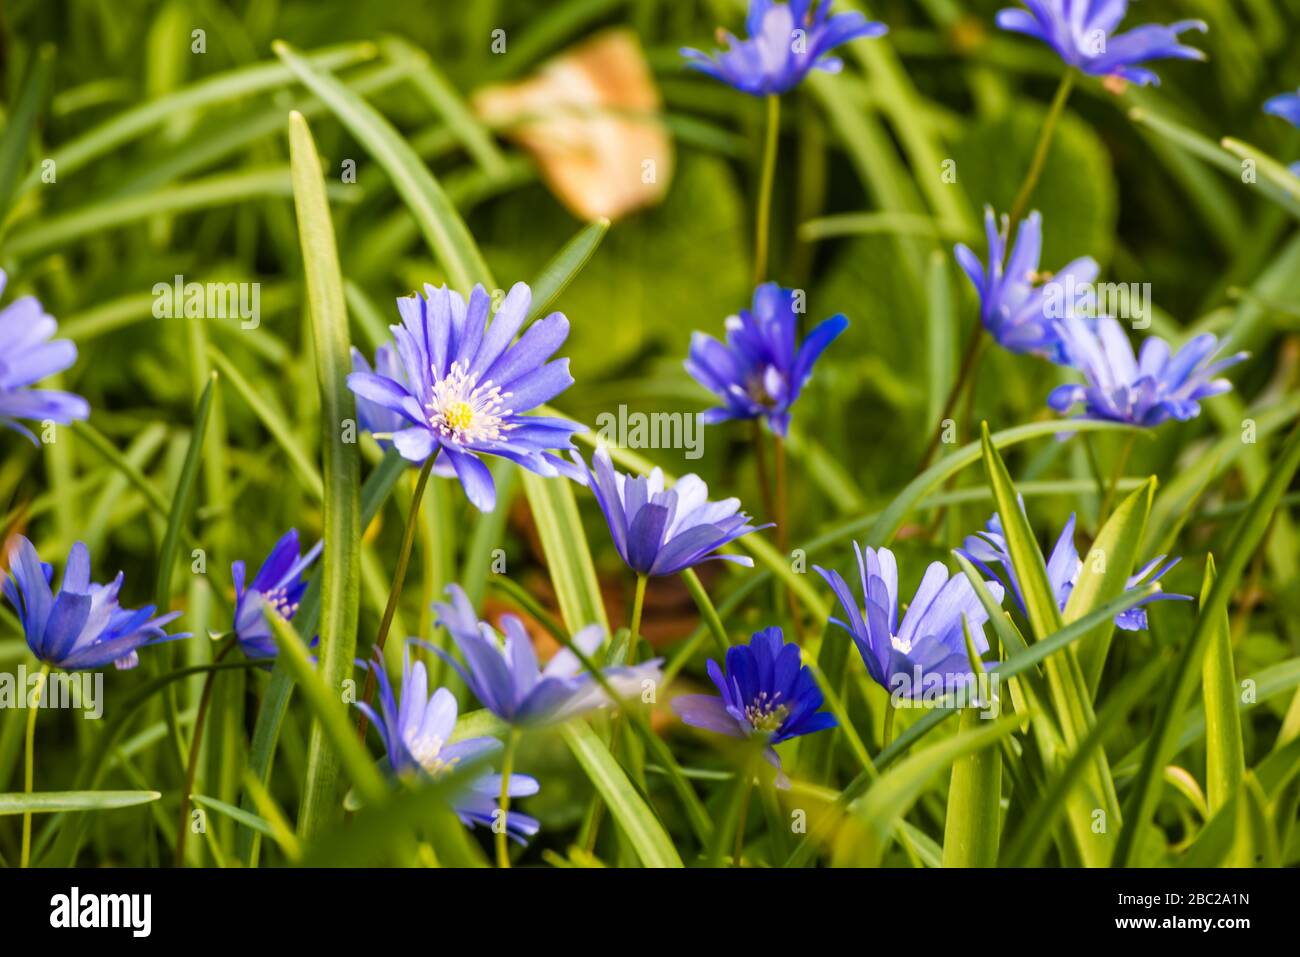 Wild Flowers growing in a private garden. Stock Photo